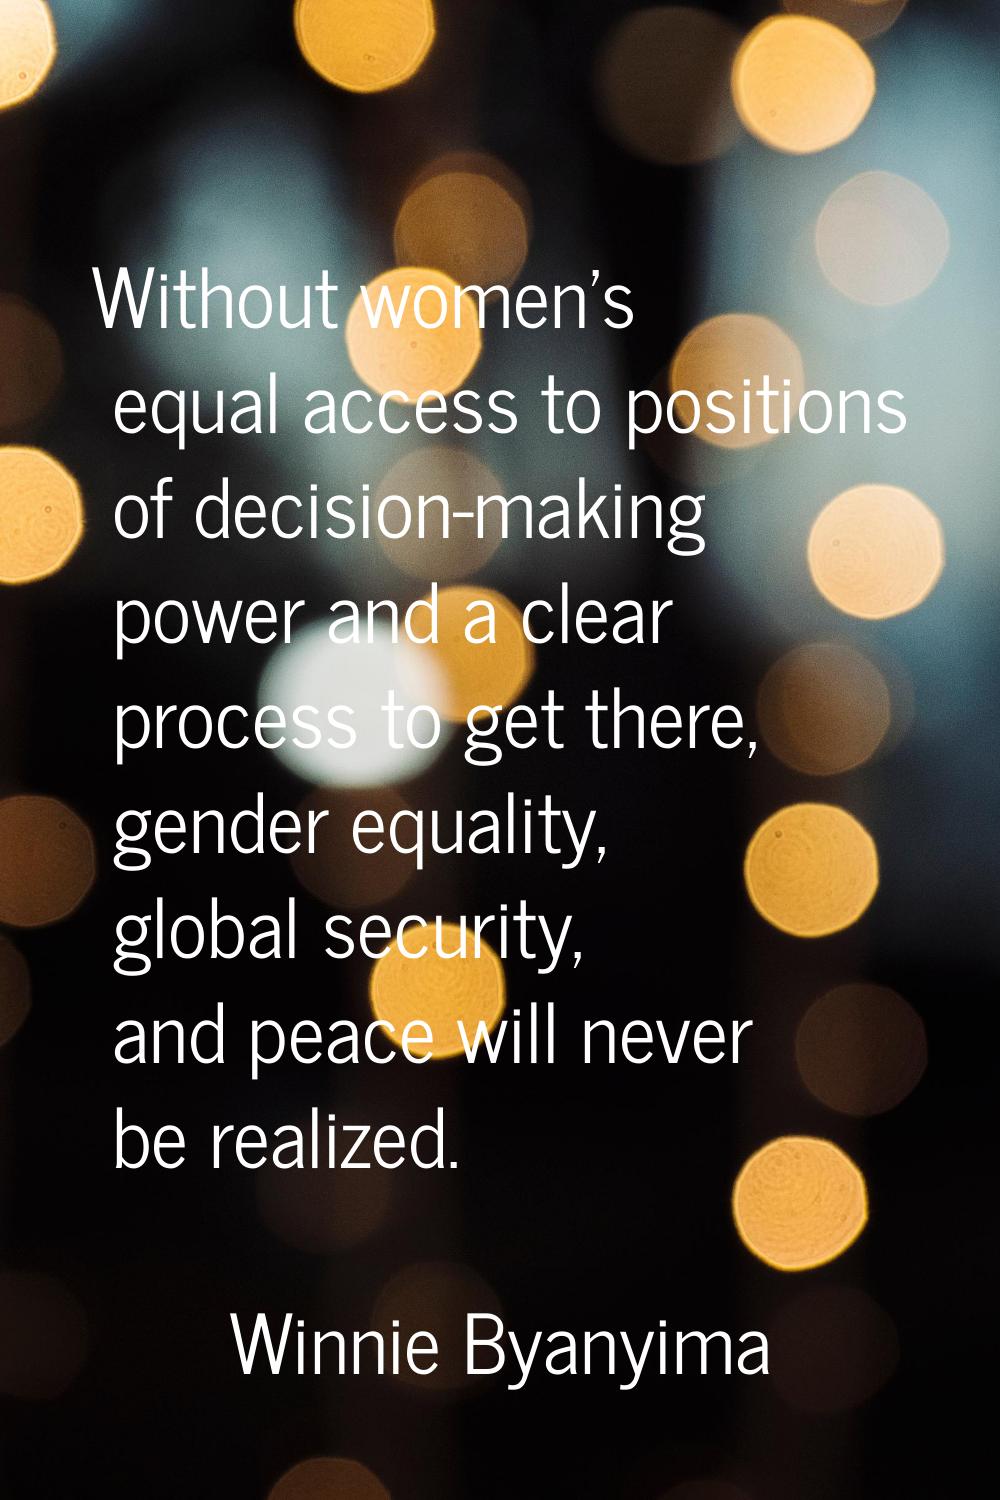 Without women's equal access to positions of decision-making power and a clear process to get there